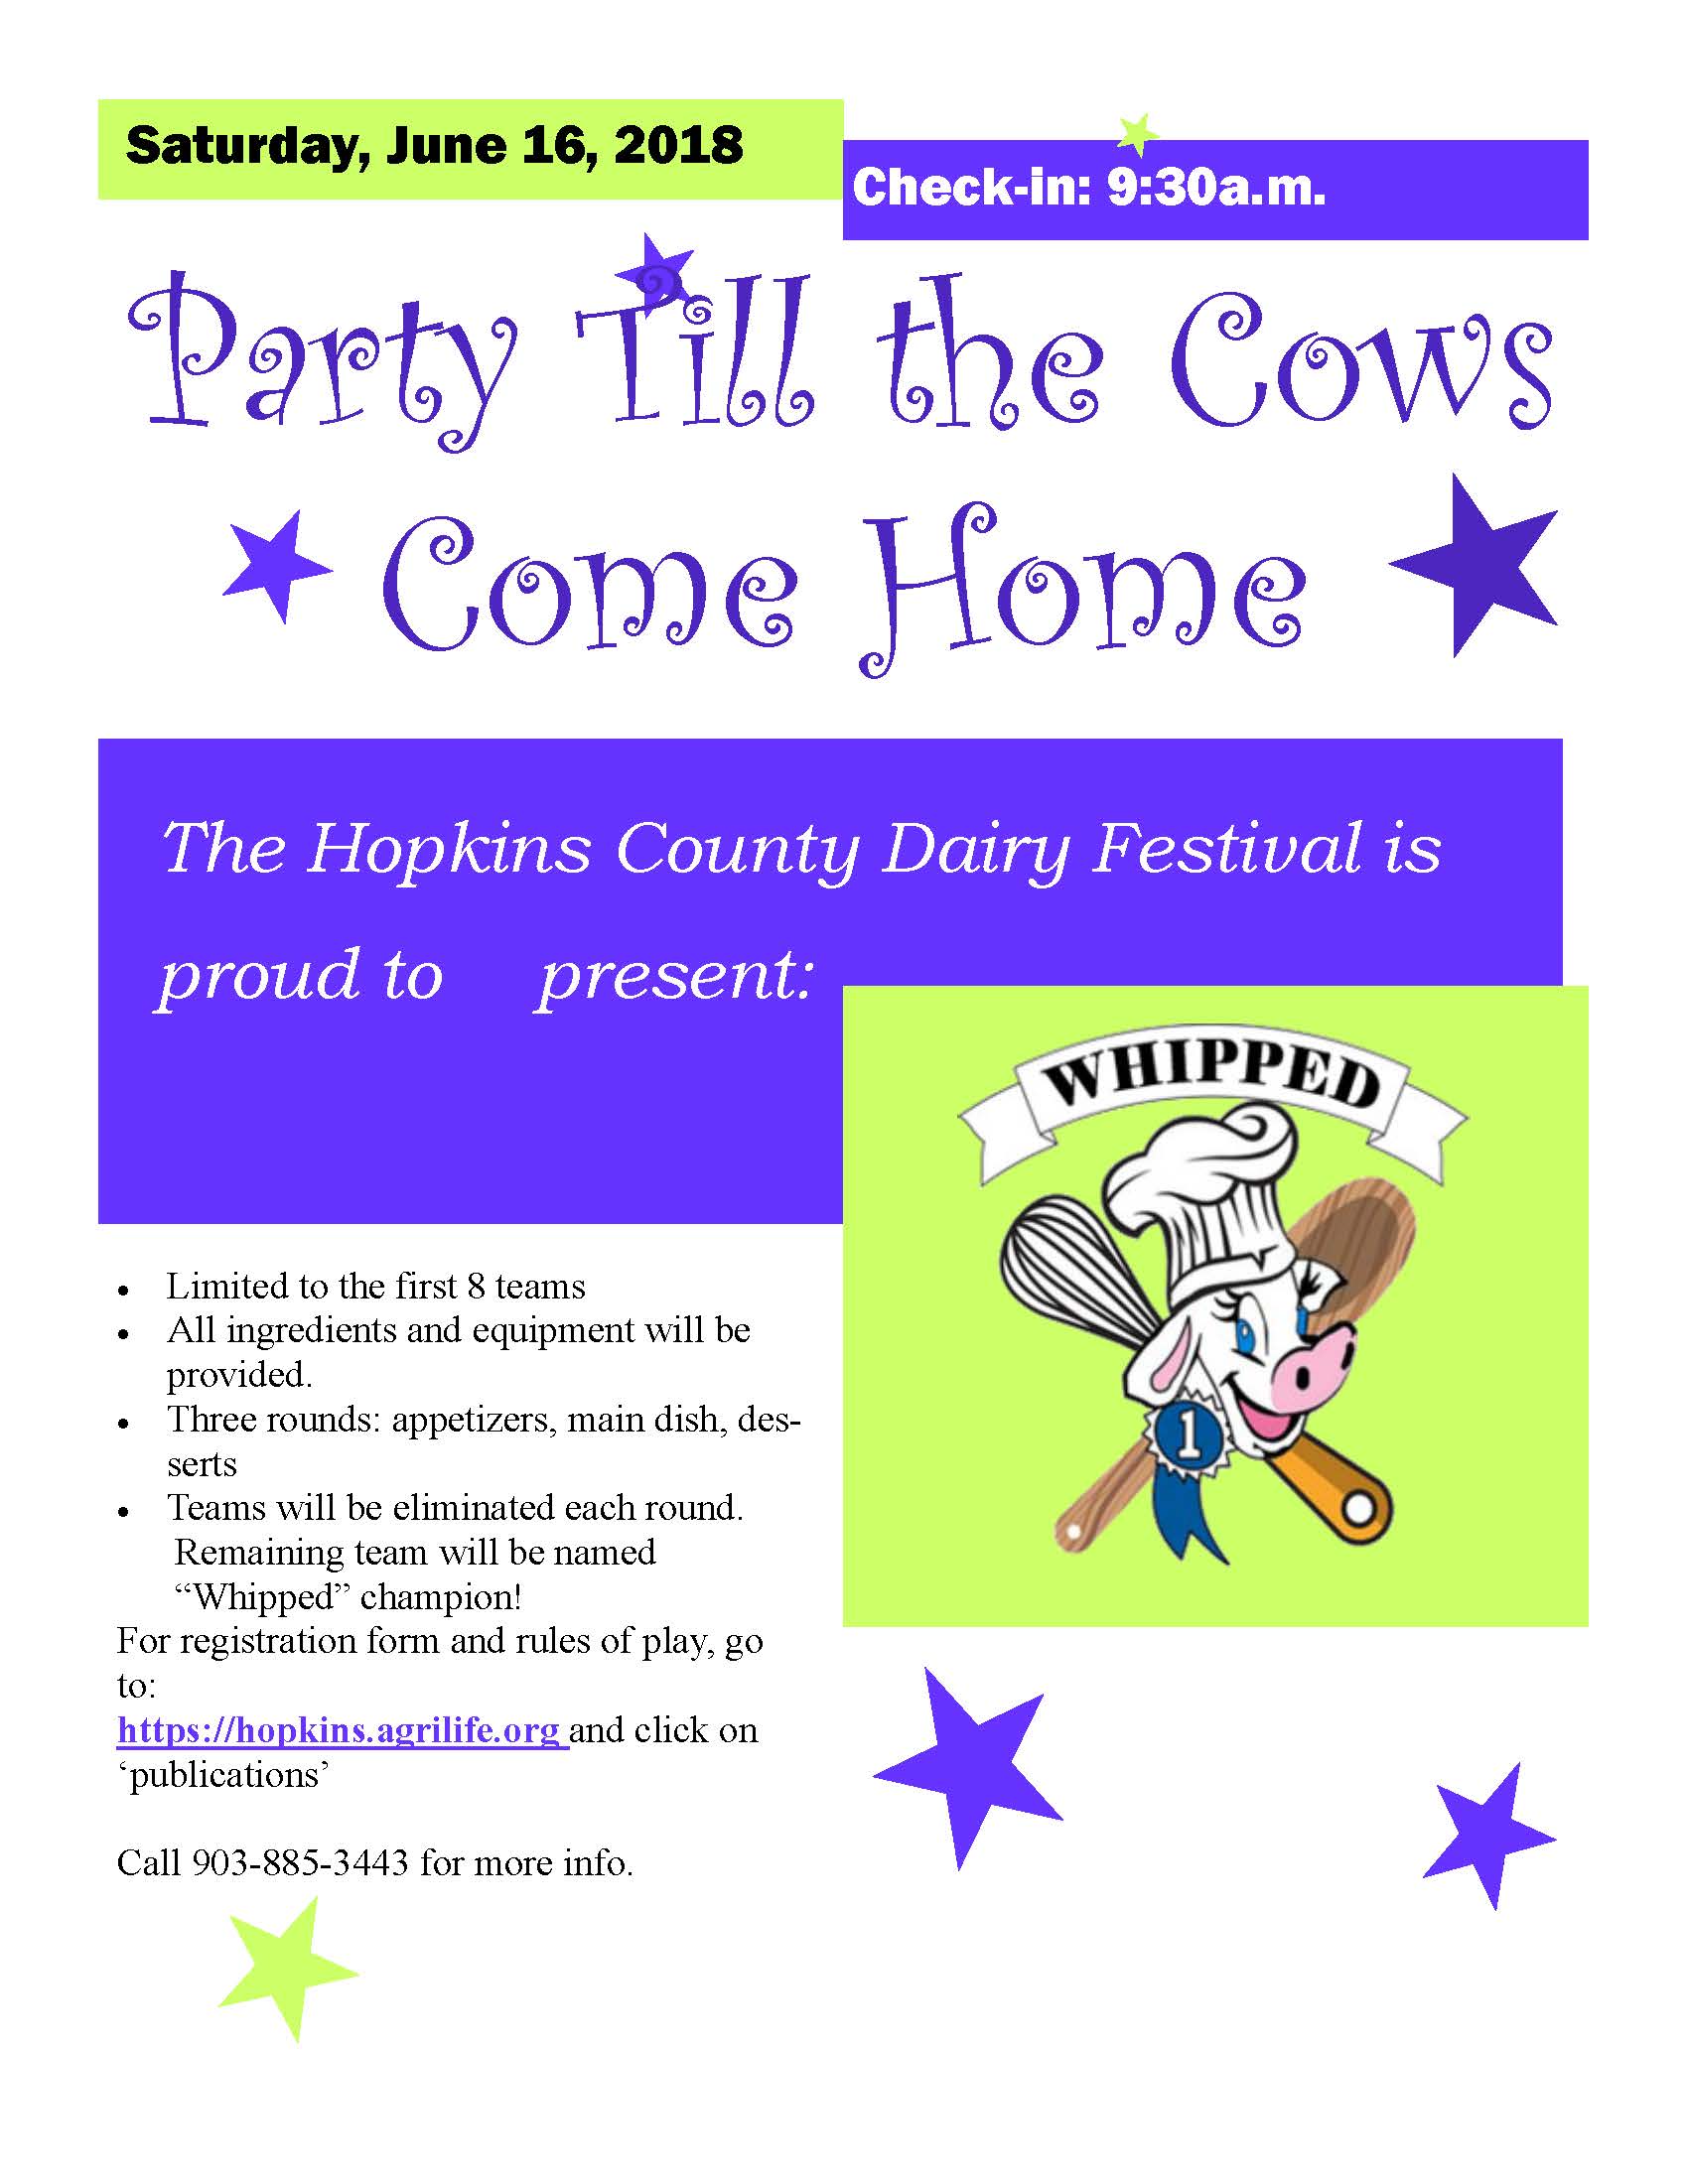 2018 Hopkins County Dairy Festival “Whipped” Cooking Challenge and More by Johanna Hicks